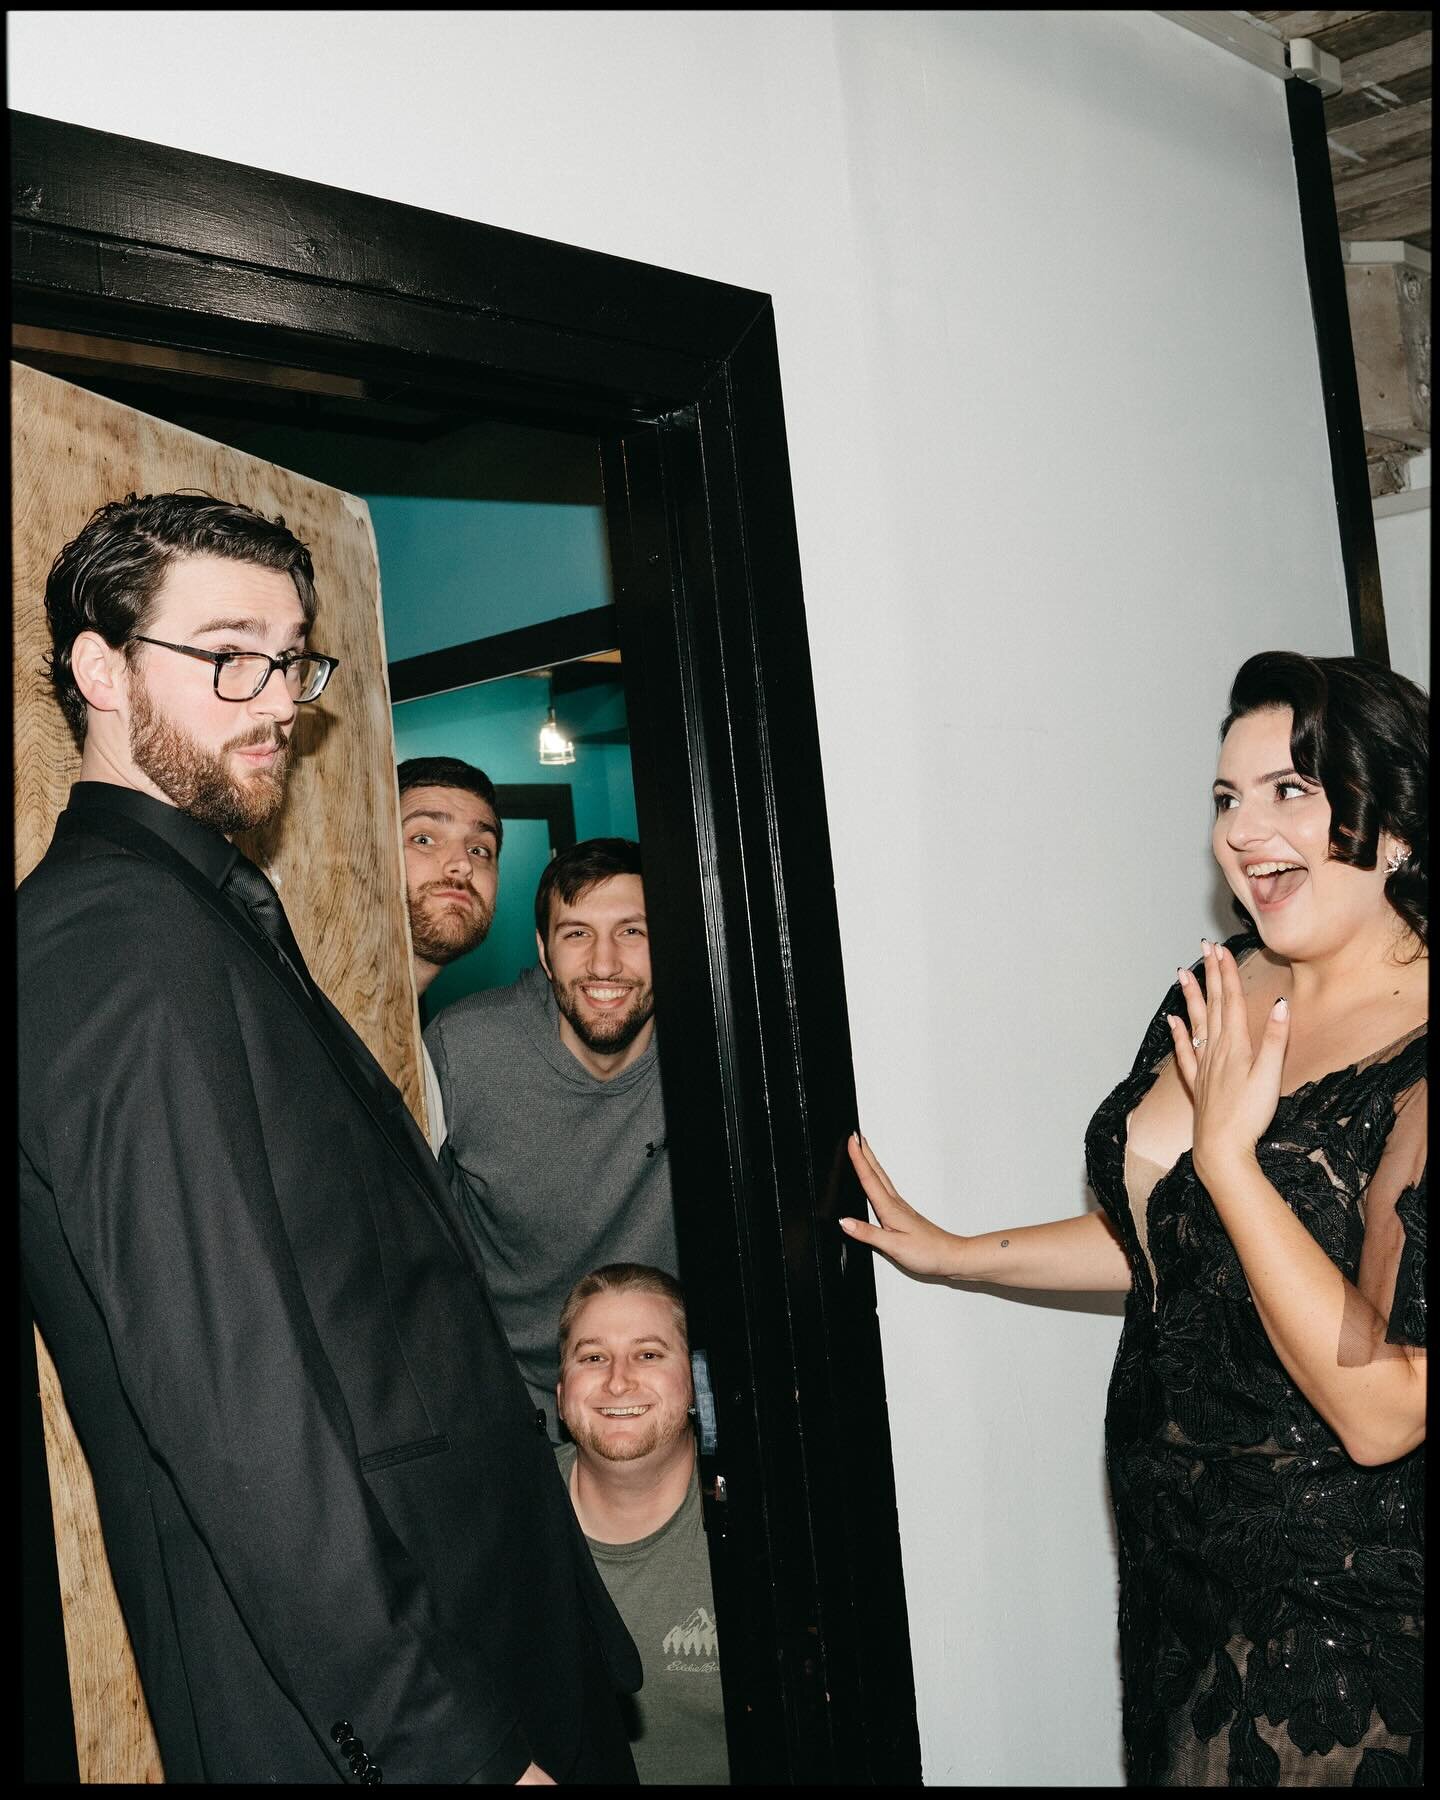 Unconventional wedding days and candid moments with cool people! Jen and Peter&rsquo;s New Year&rsquo;s Eve celebration began with plenty of laughs and imperfectly perfect moments that truly reflected their easygoing, silly, and awesome personalities